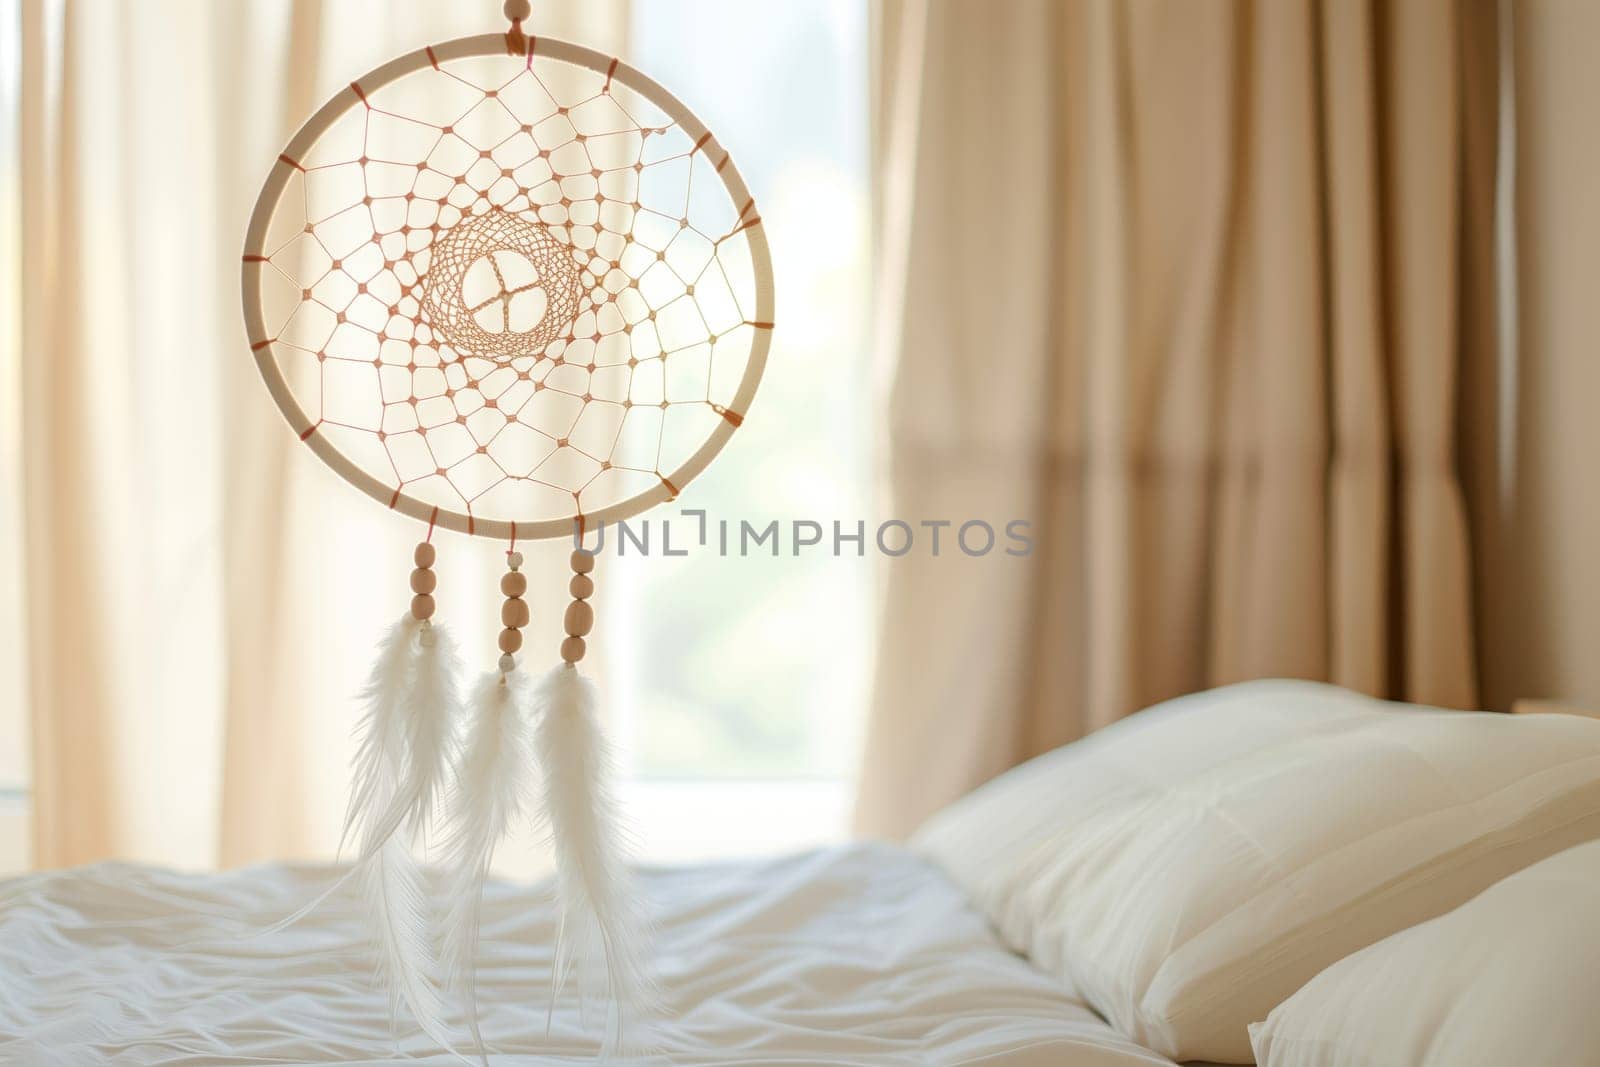 A wooden dream catcher hangs above the bed, adding a touch of comfort and whimsy to the interior design. The circular pattern complements the glass window treatments and linens